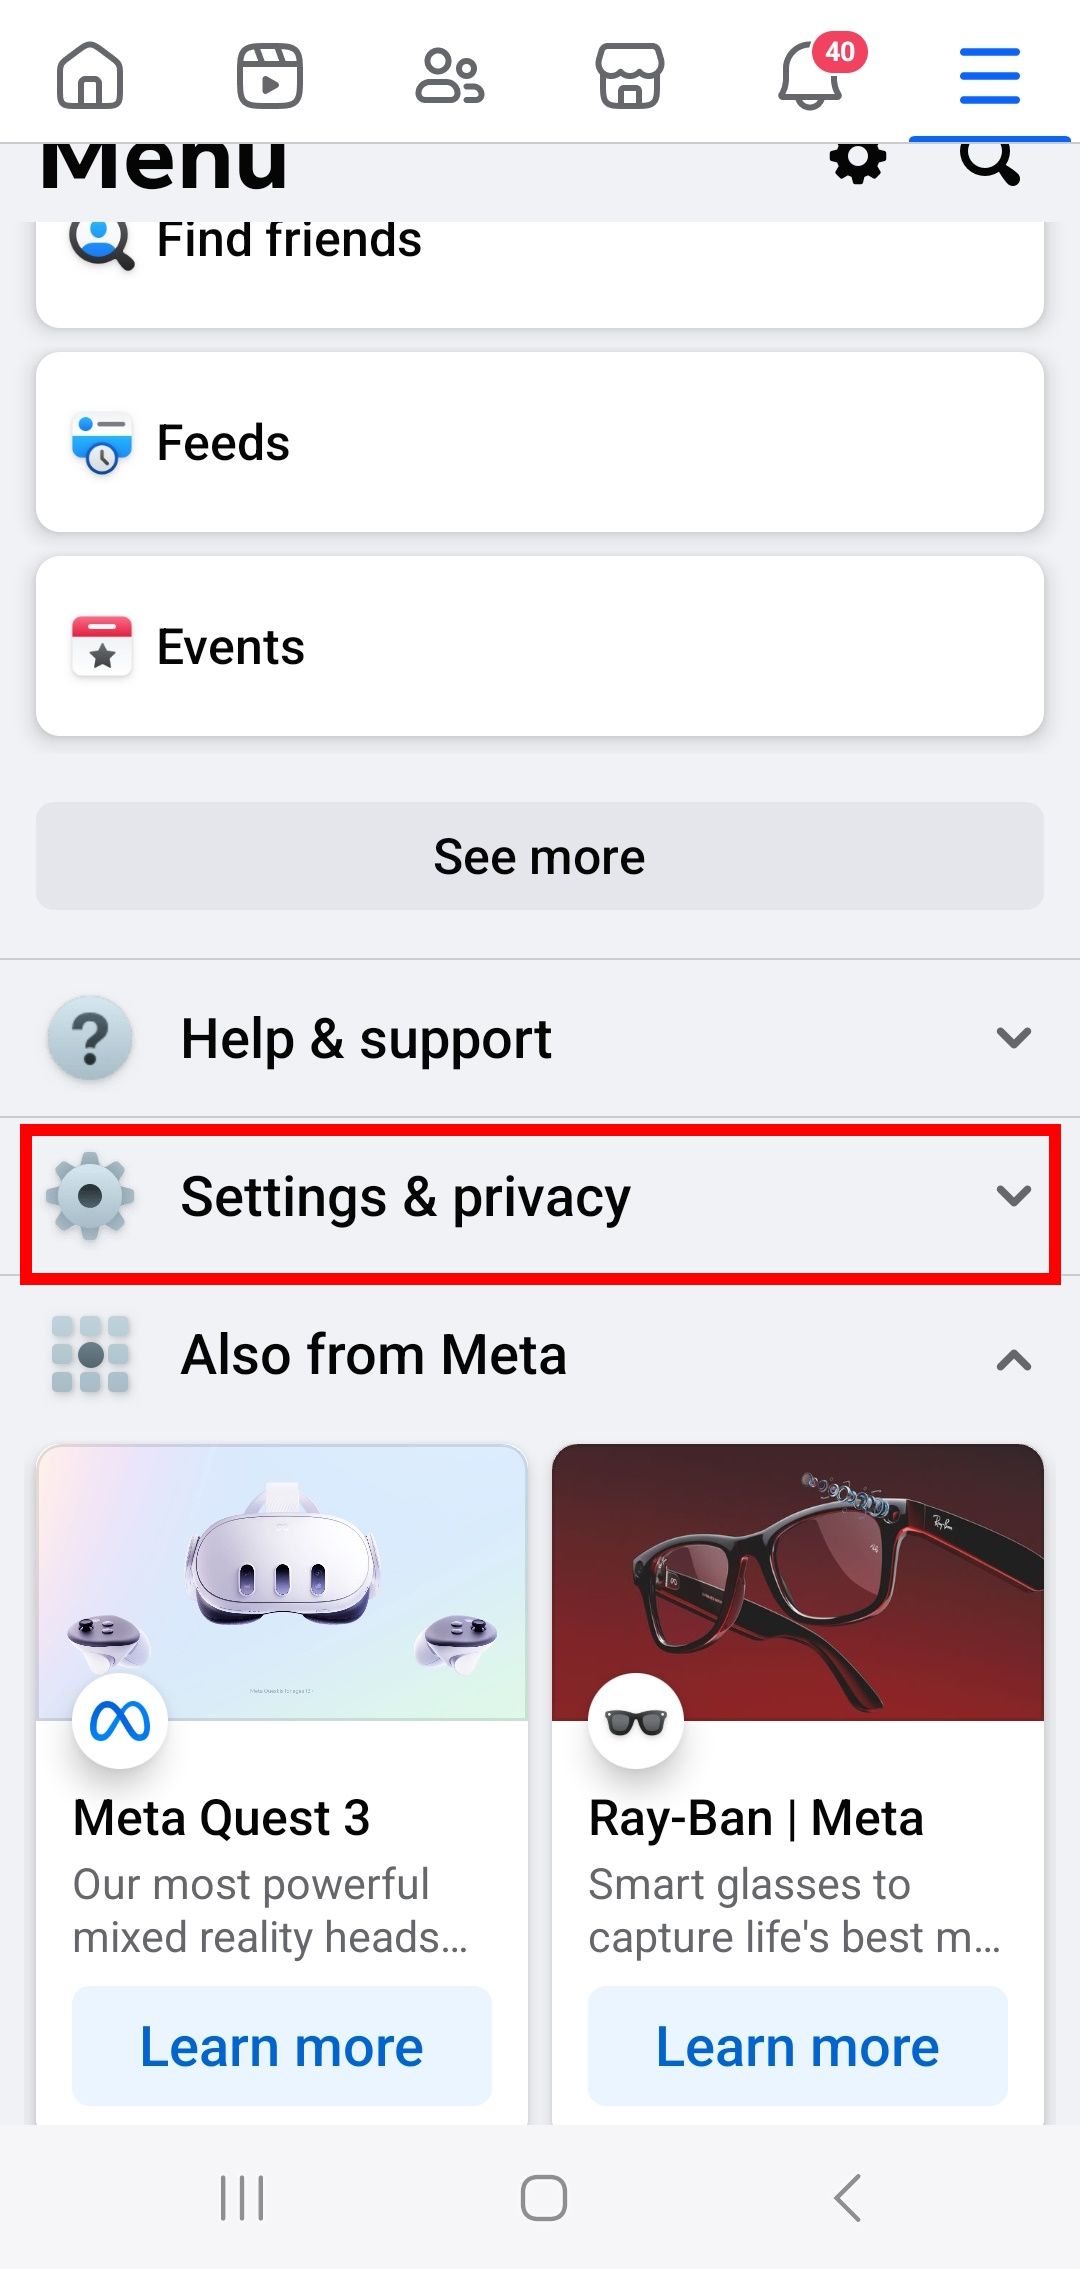 red rectangle outline highlighting settings & privacy option in menu